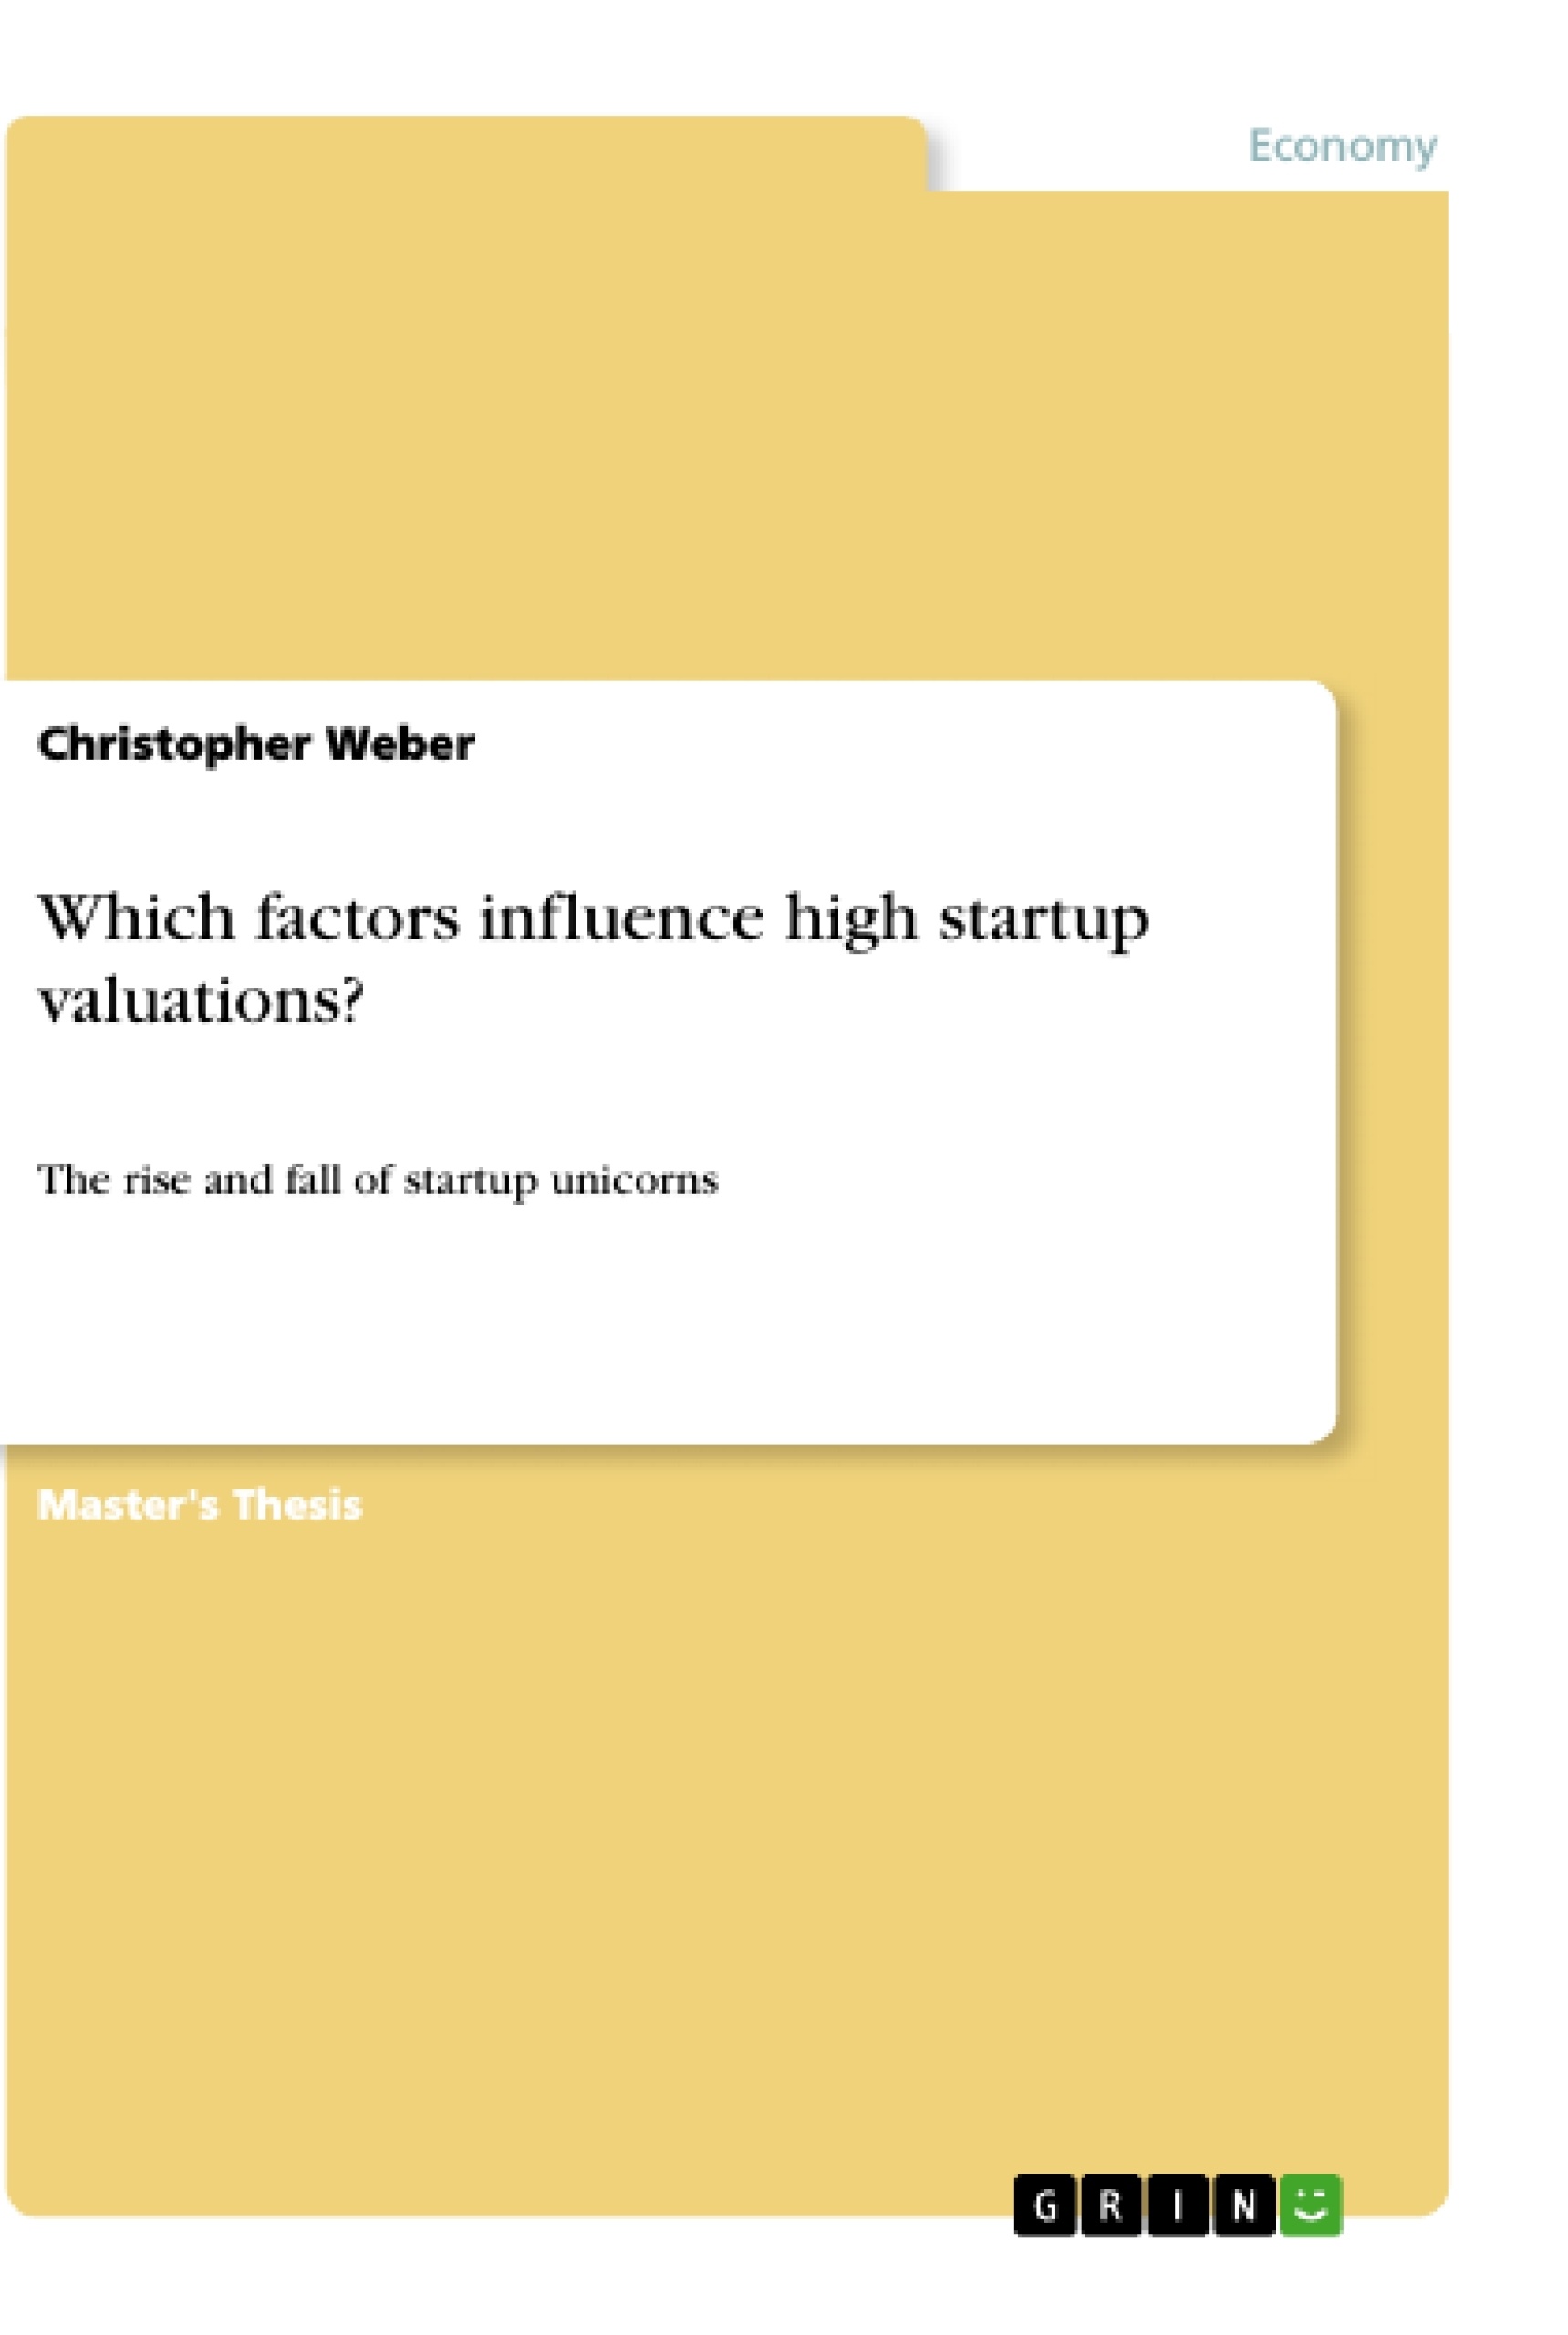 Title: Which factors influence high startup valuations?